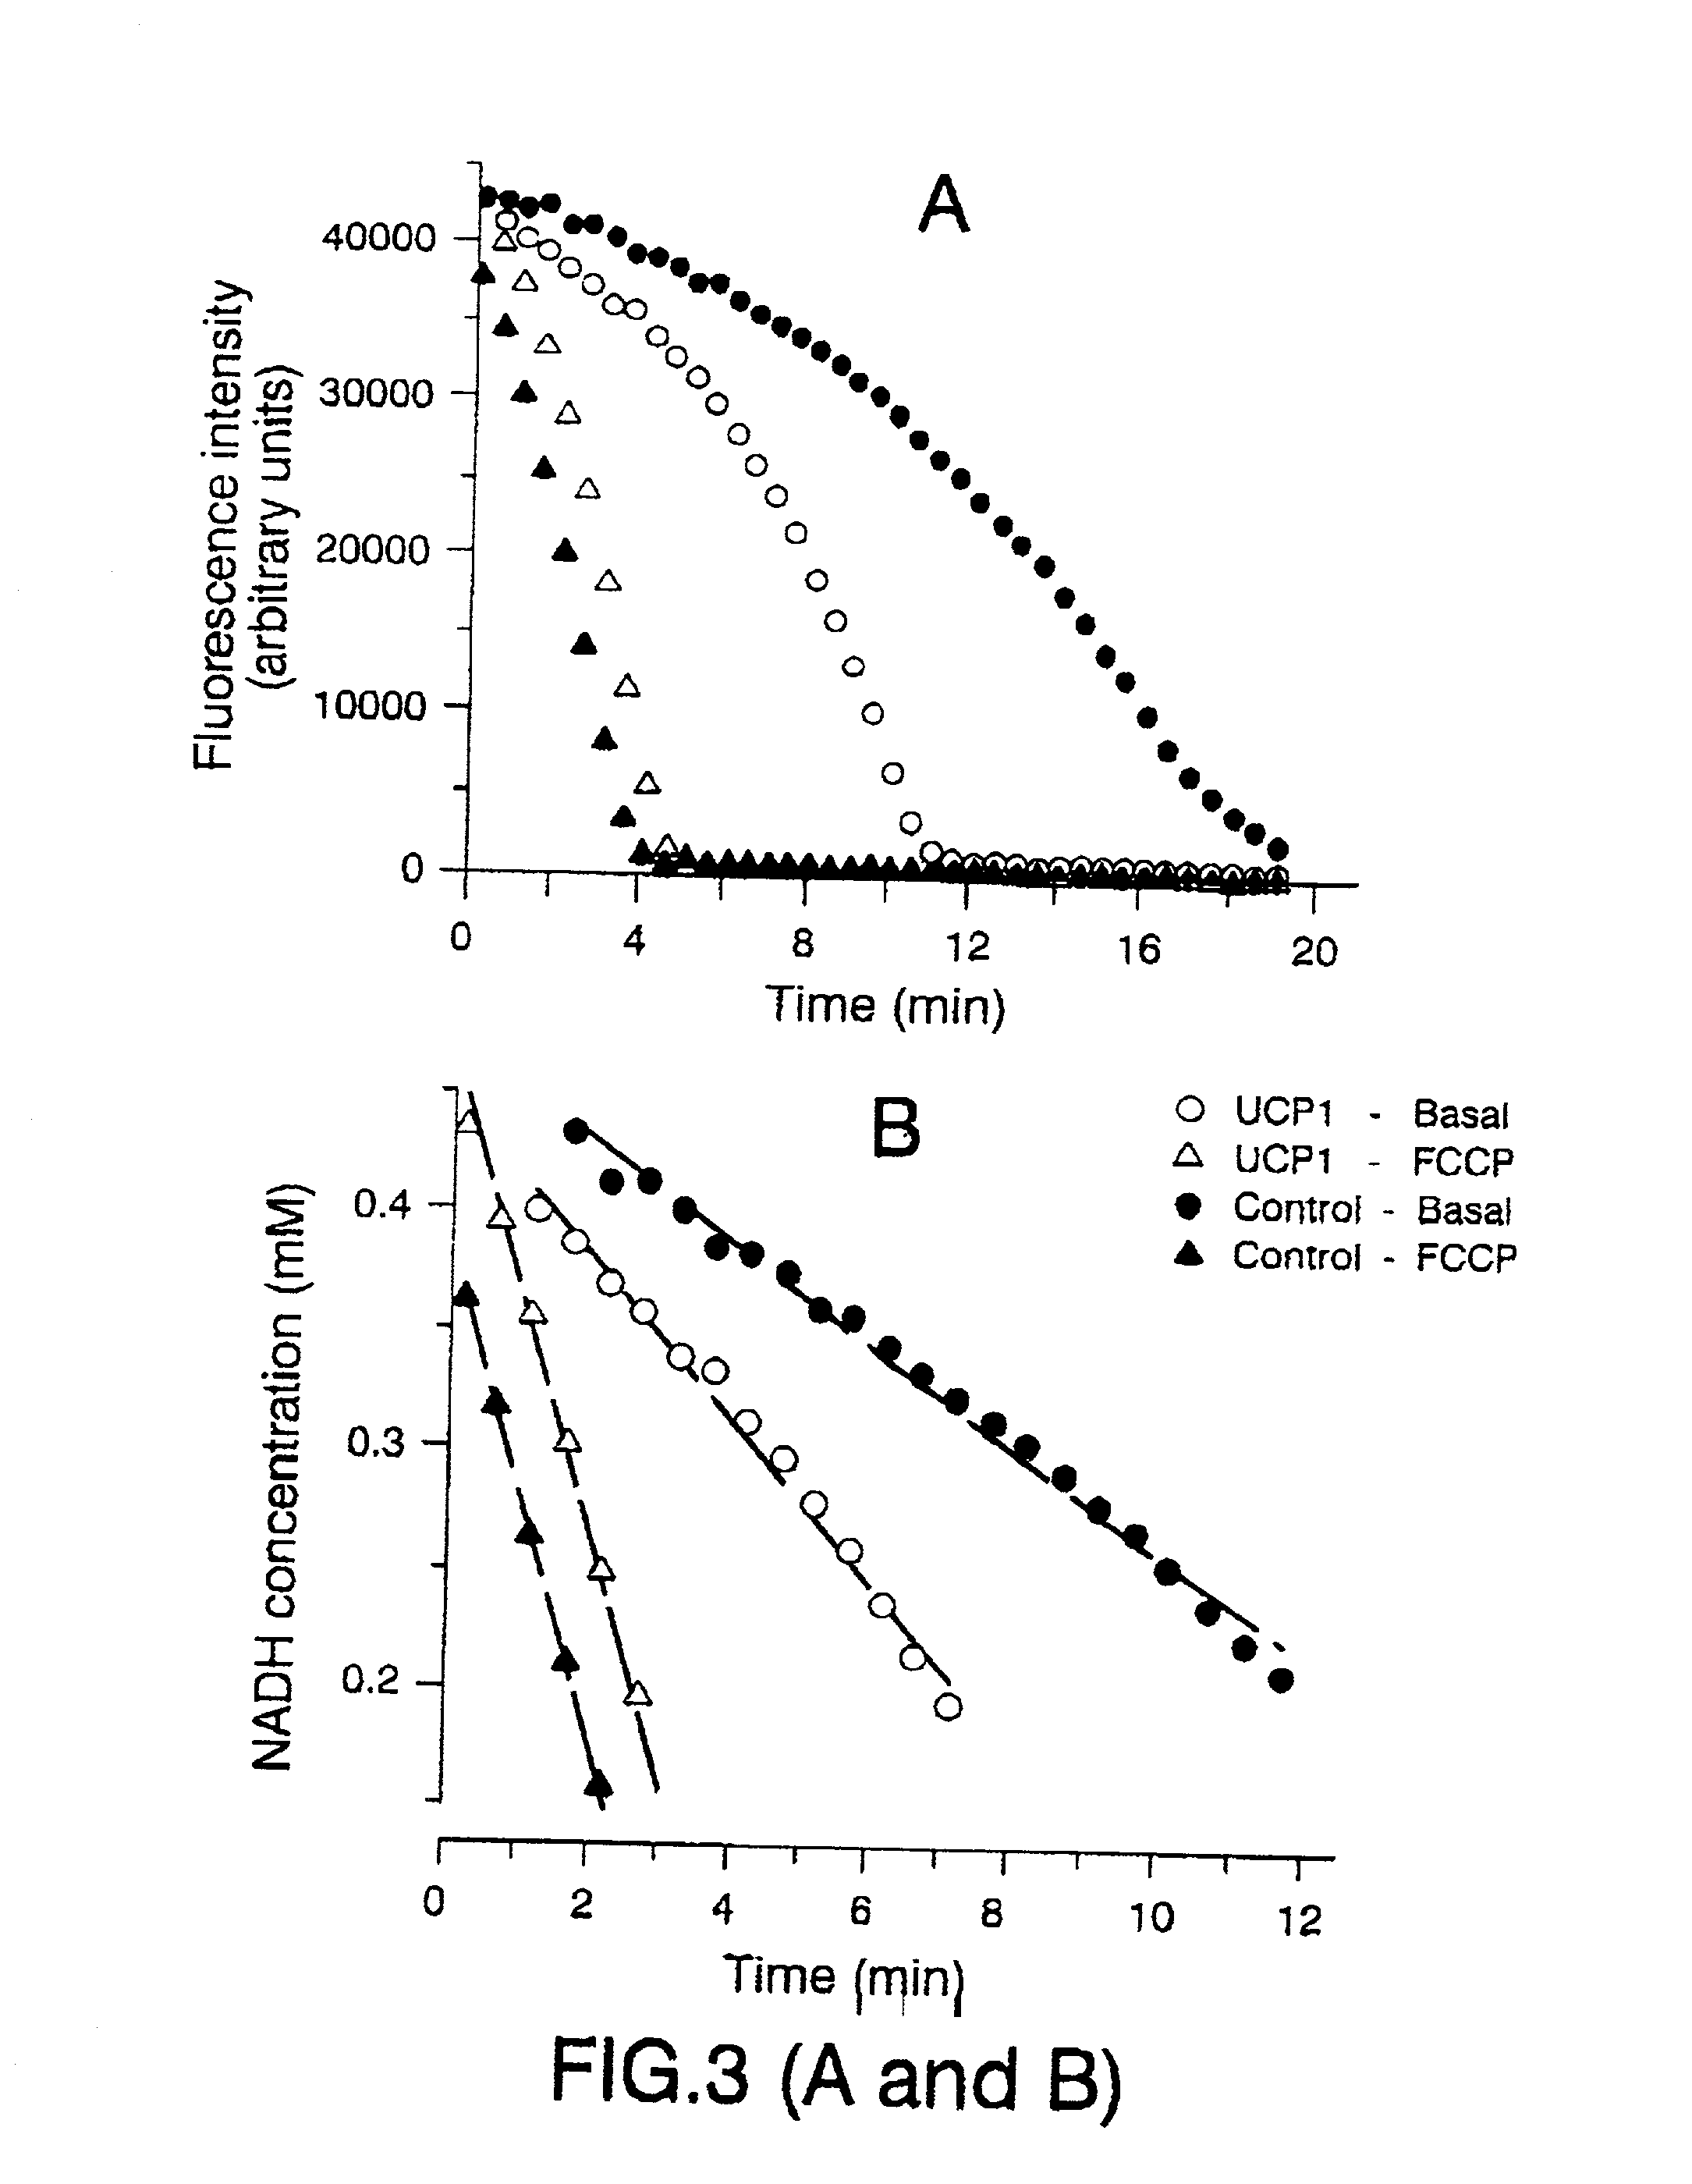 Method for determining the activity of uncoupling proteins (UCPs) by monitoring NAD(P)H consumption